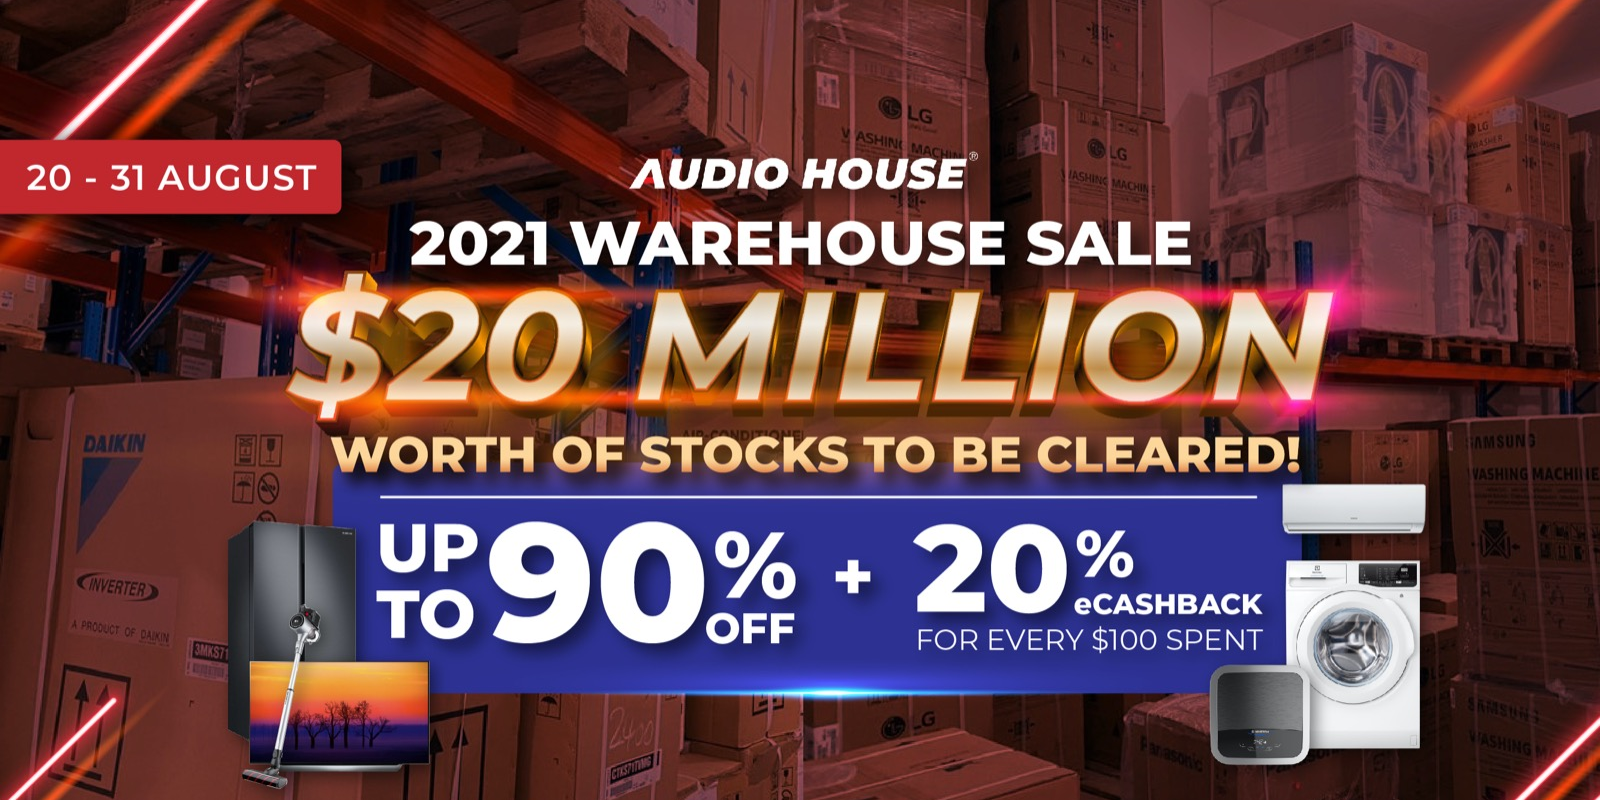 More than $20 million worth of Stocks to be Cleared at Audio House 2021 Warehouse Sale!